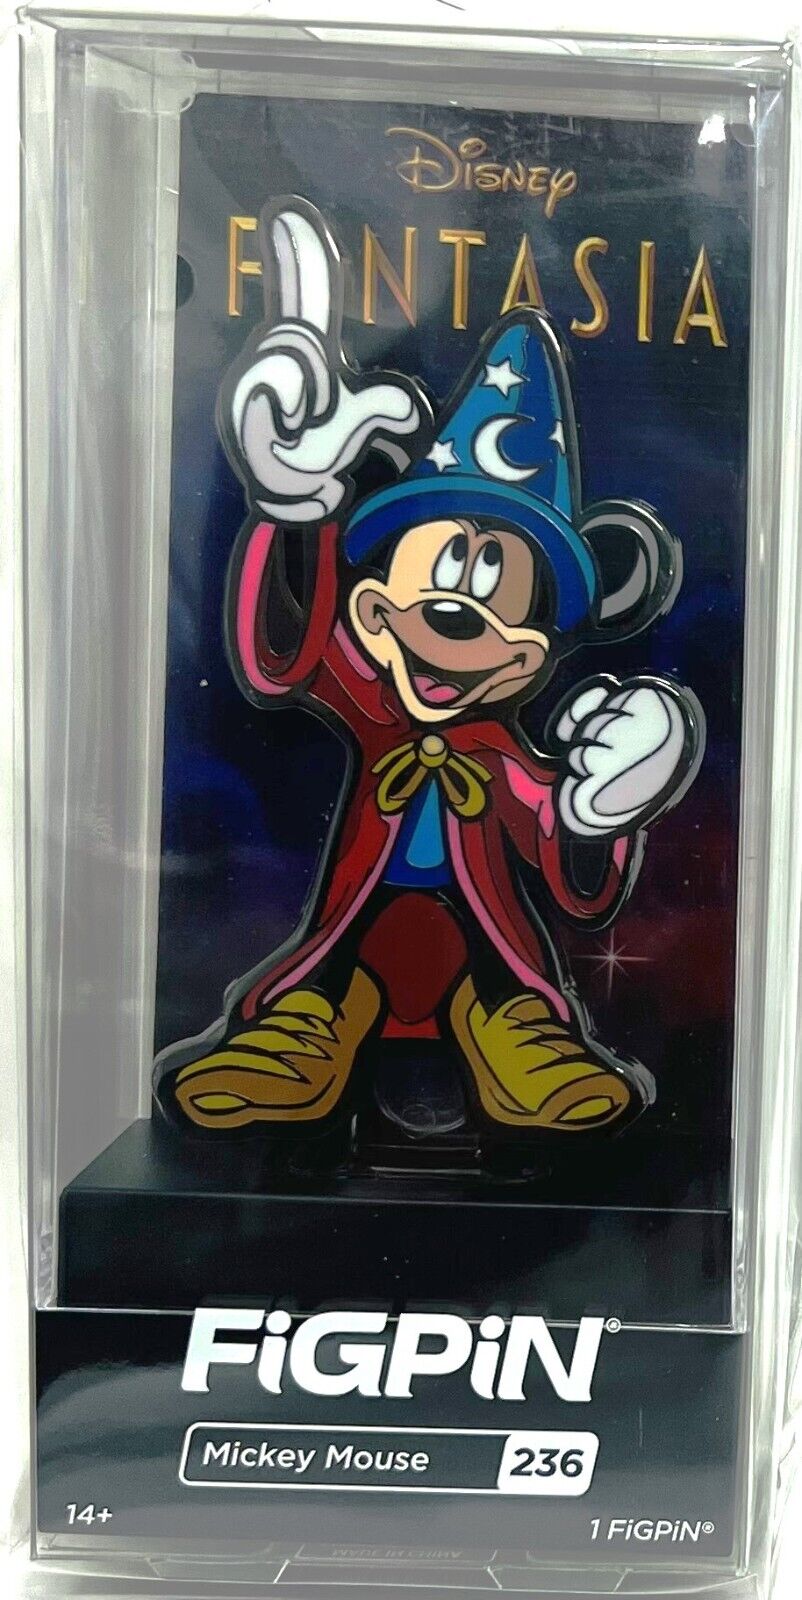 FiGPiN Sorcerer Mickey Mouse Collectible Pin #236